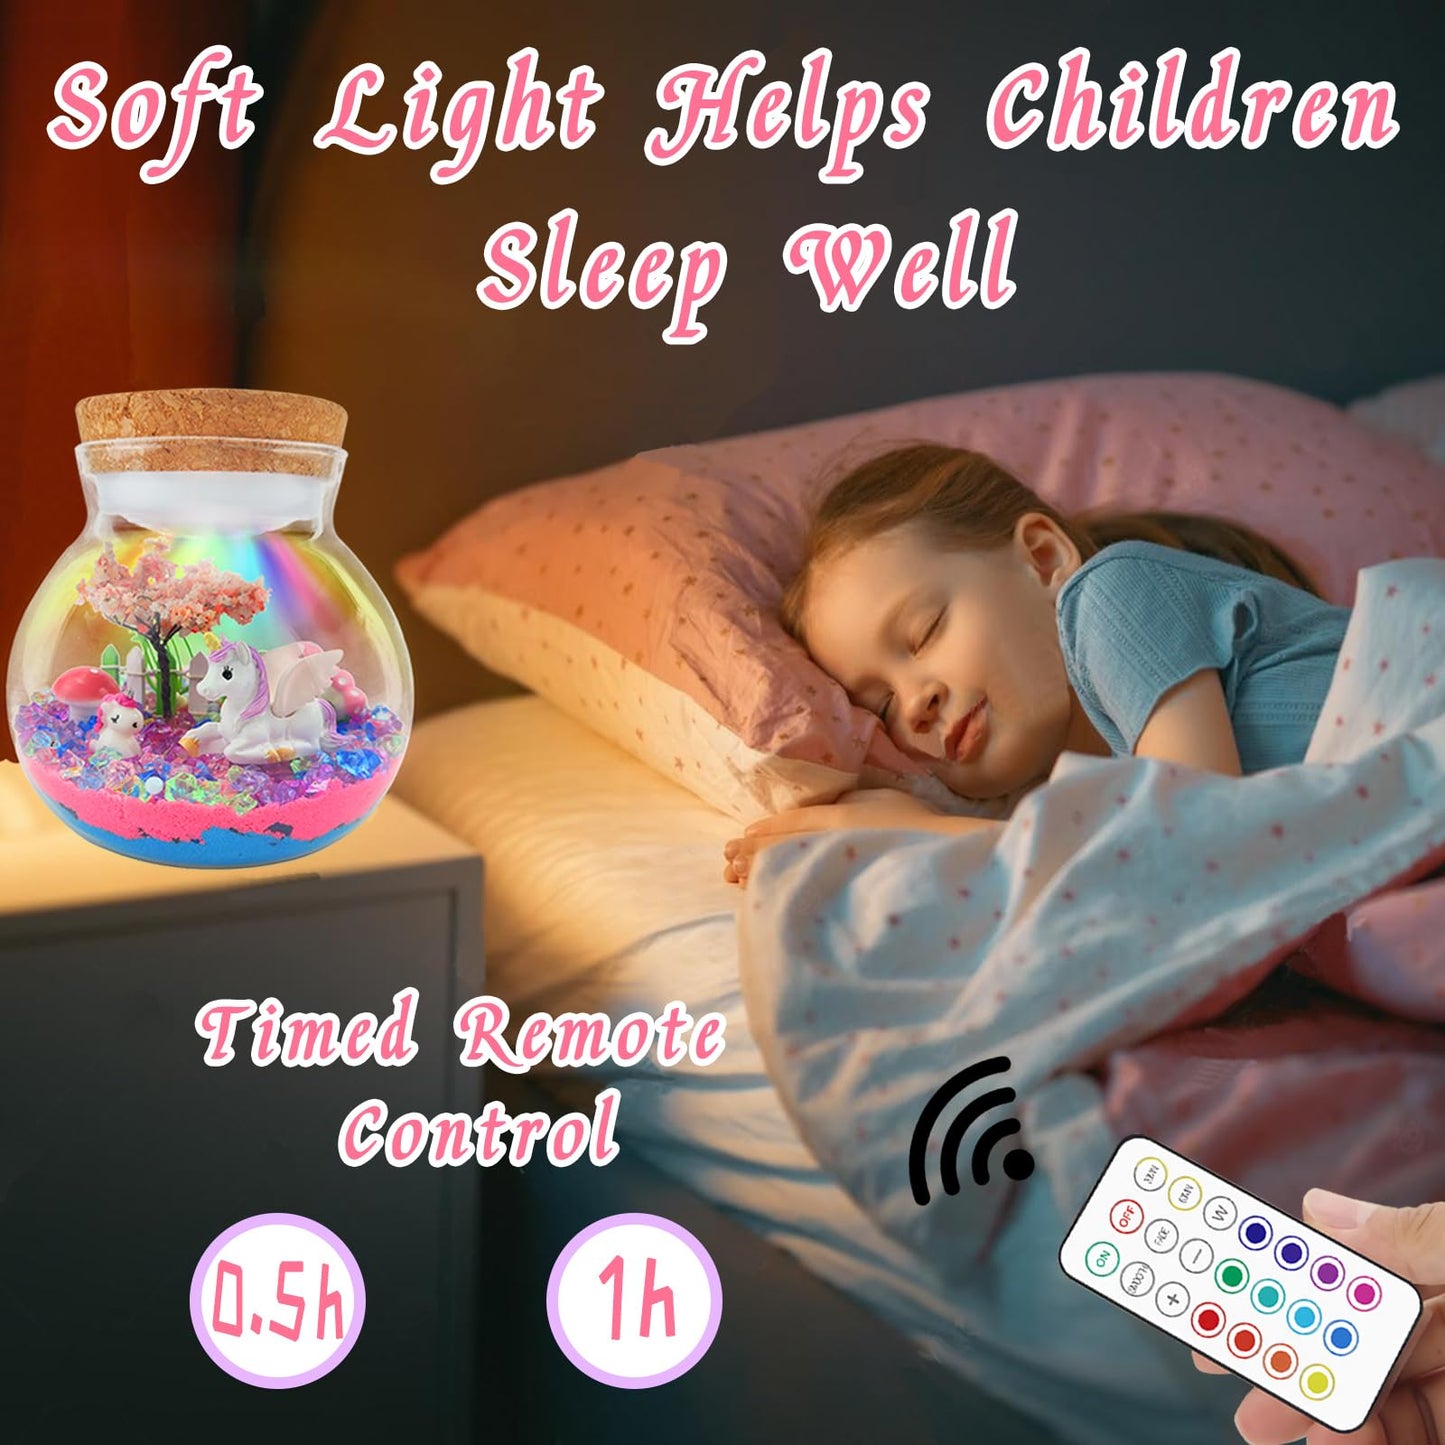 Unicorn Terrarium Crafts Kit for Kids-LED Night Light Up & Remote Unicorn Birthday Gifts Toys for Girls Ages 4 5 6 7 8 9 10 Year Old for Girls